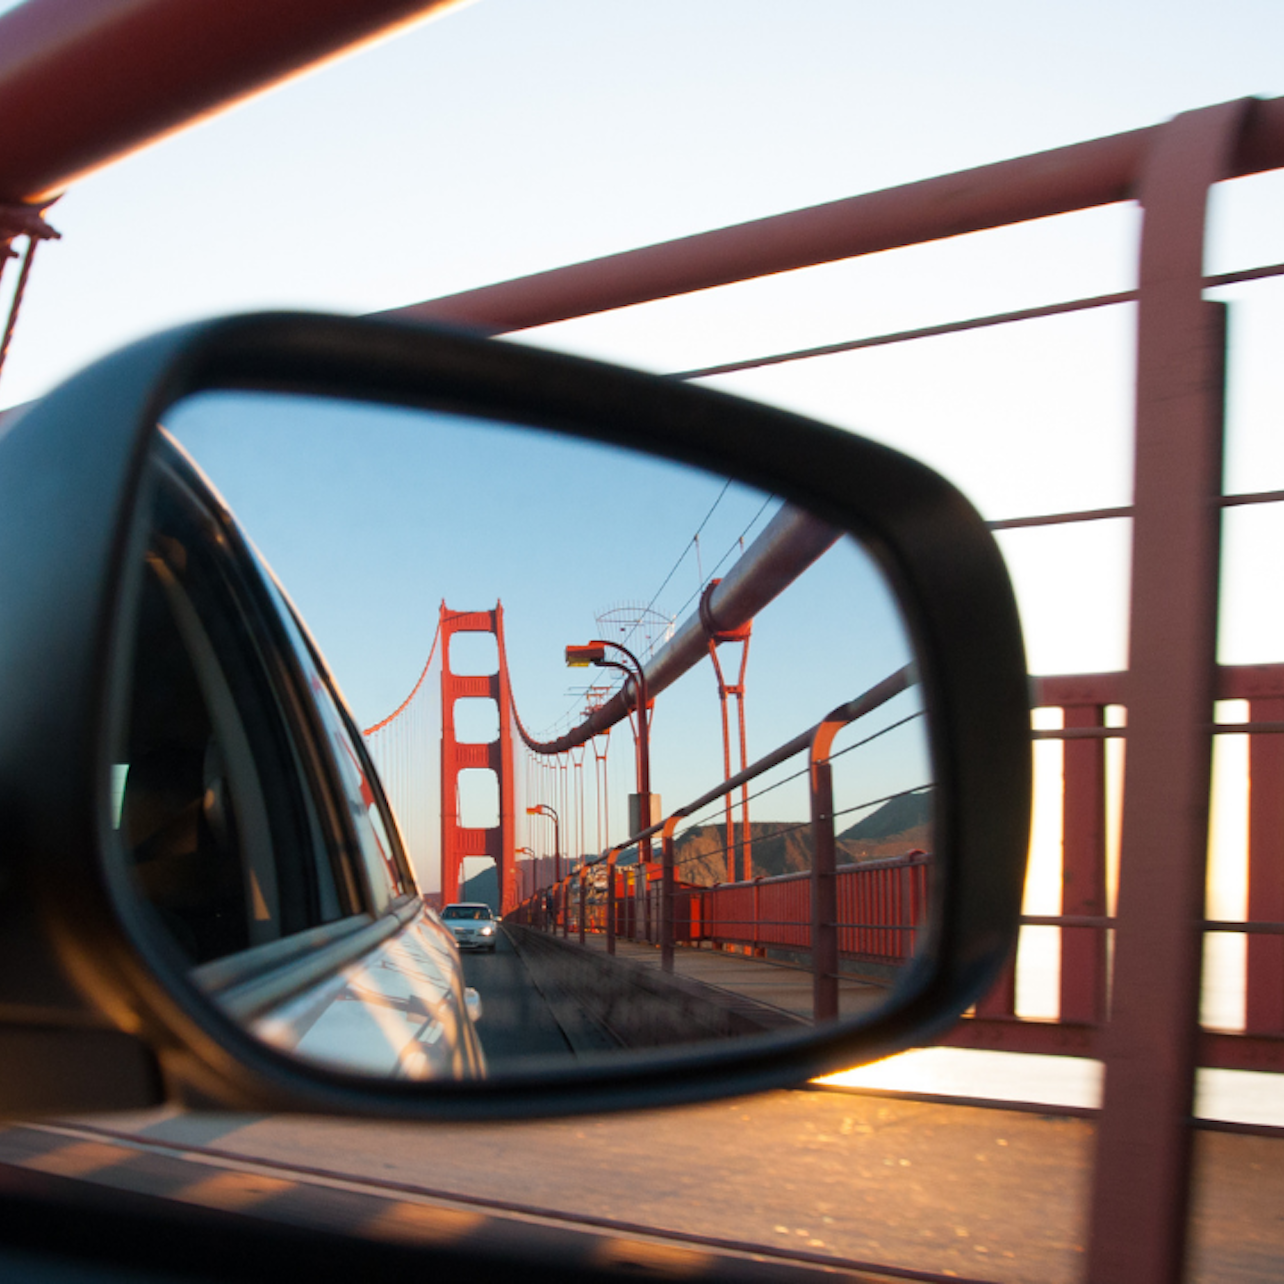 Gold Rush to Golden Gate: Self-Guided Tour of San Francisco - Accommodations in San Francisco